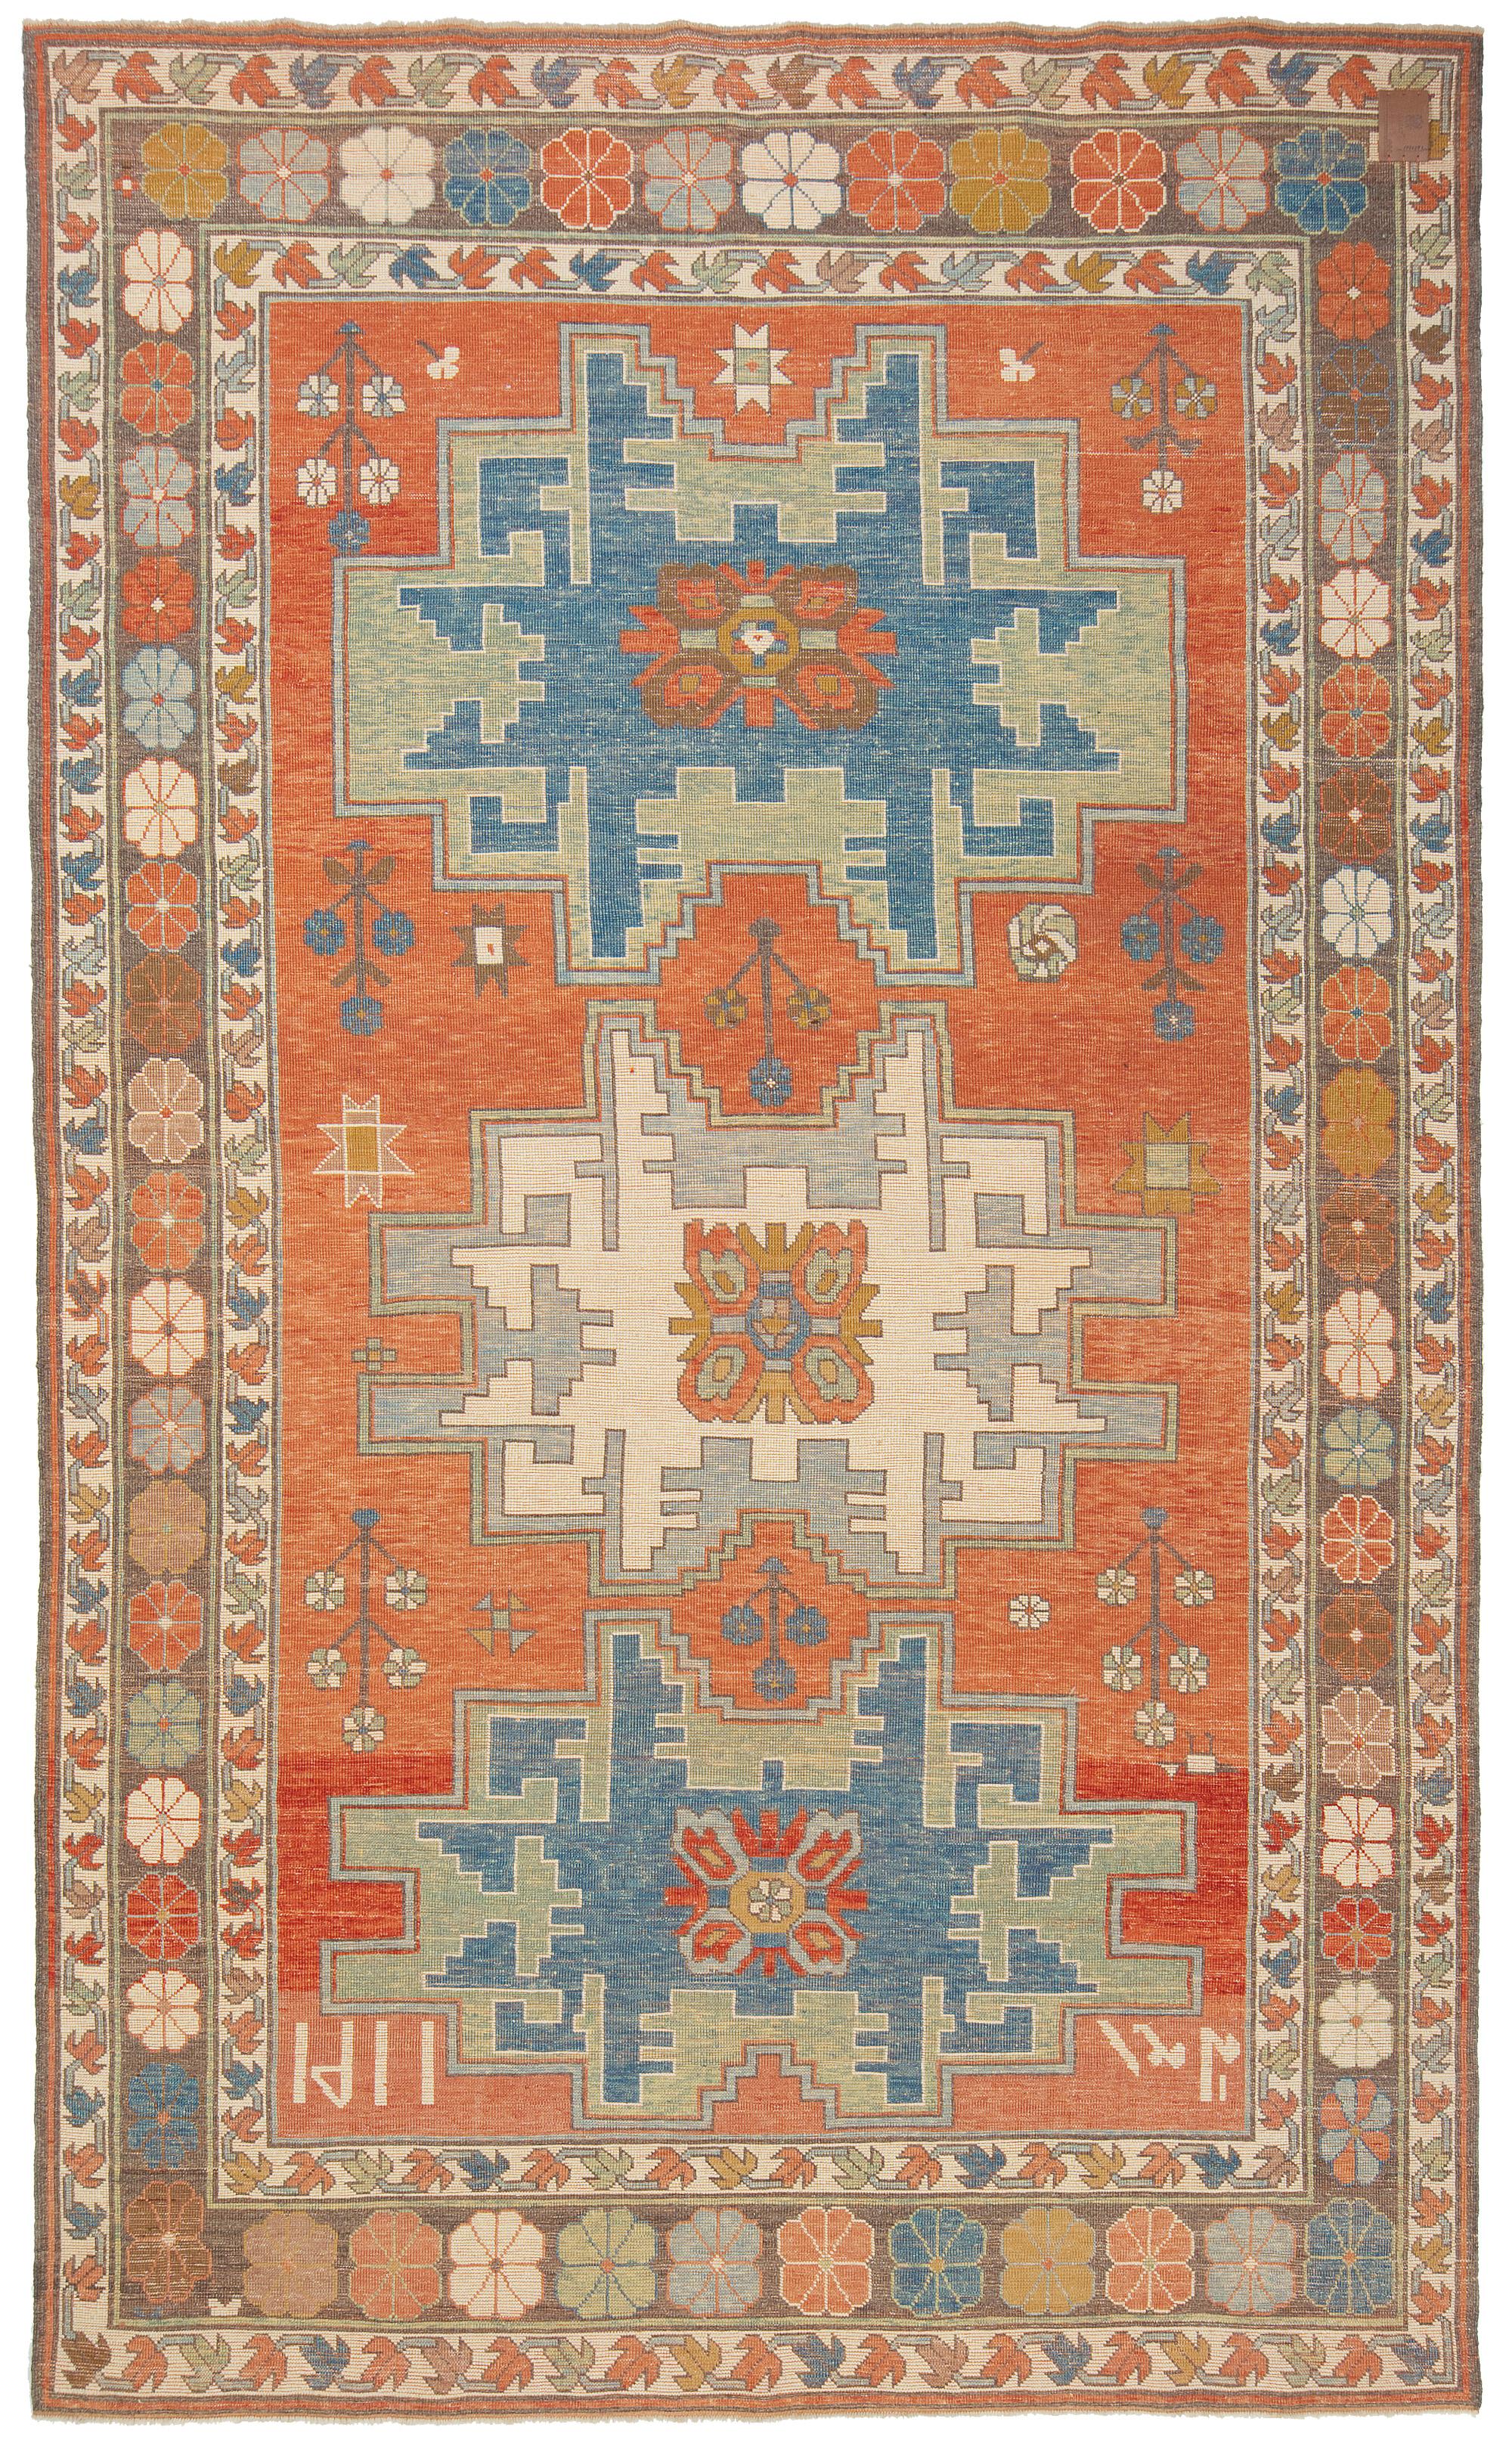 The source of the rug comes from the book Tapis du Caucase – Rugs of the Caucasus, Ian Bennett & Aziz Bassoul, The Nicholas Sursock Museum, Beirut, Lebanon 2003, nr.45 and Oriental Rugs Volume 1 Caucasian, Ian Bennett, Oriental Textile Press,